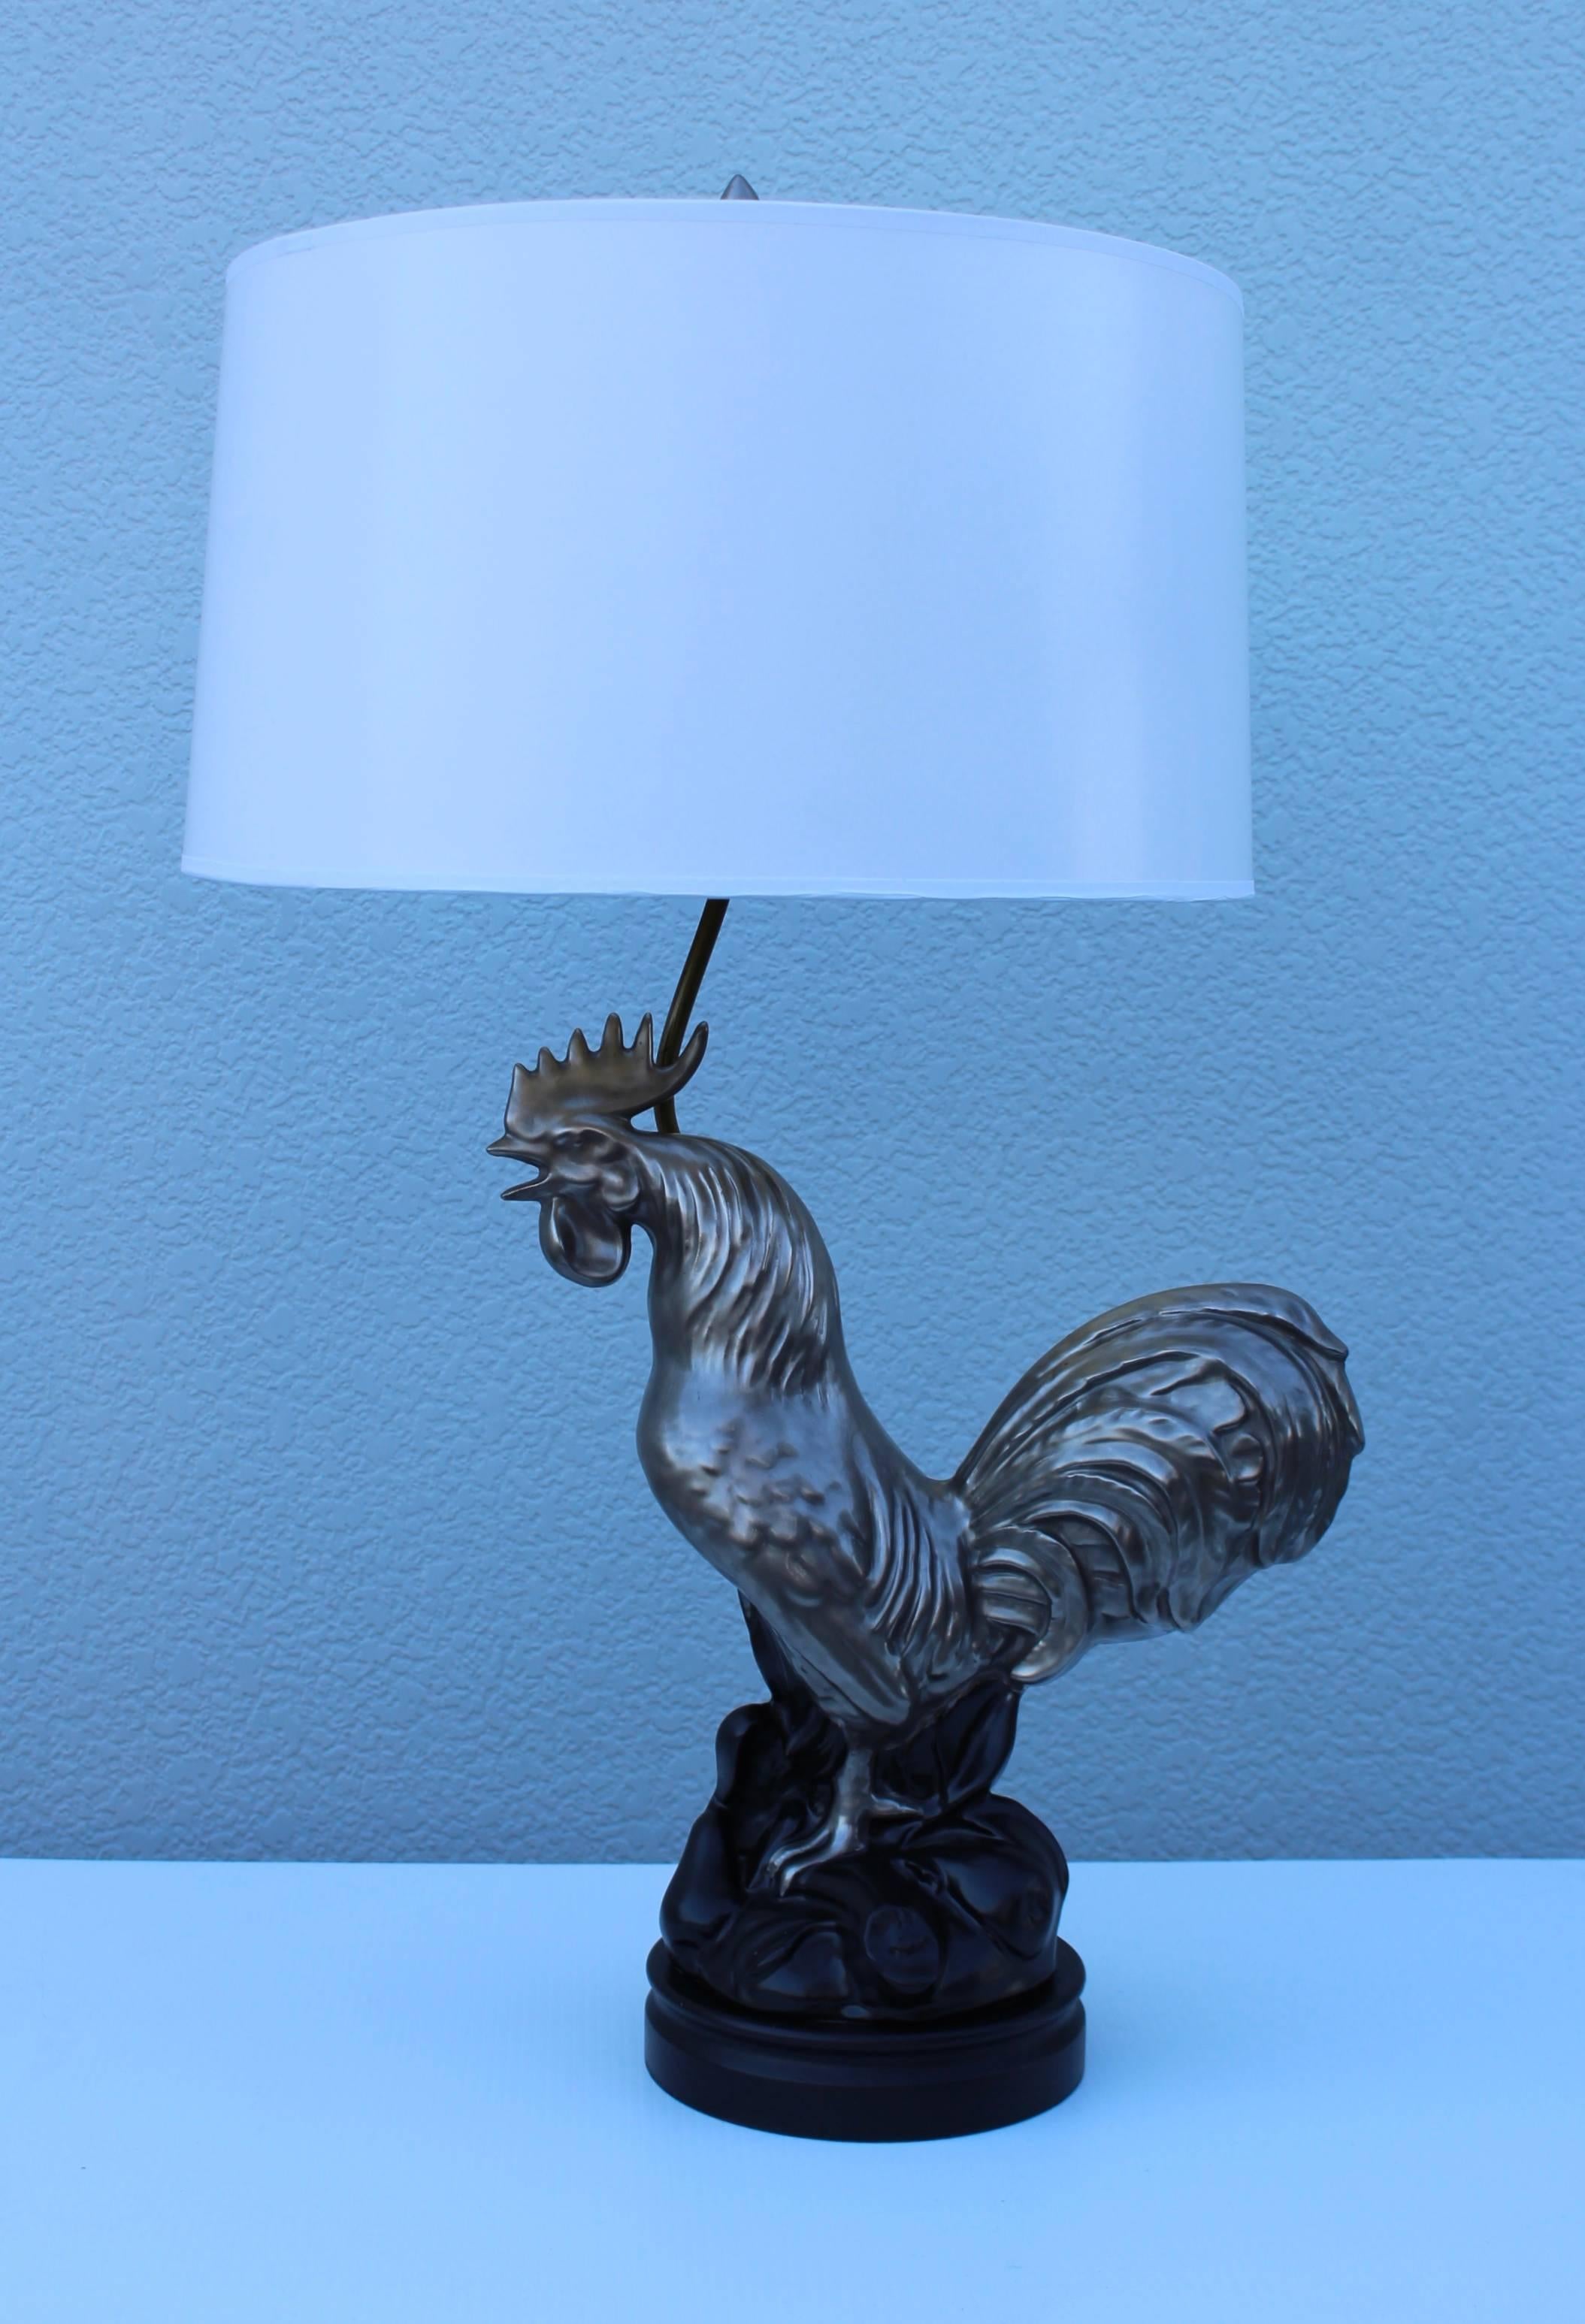 1950s silver ceramic rooster table lamp, with wood base and brass hardware.

Shape for photography only.